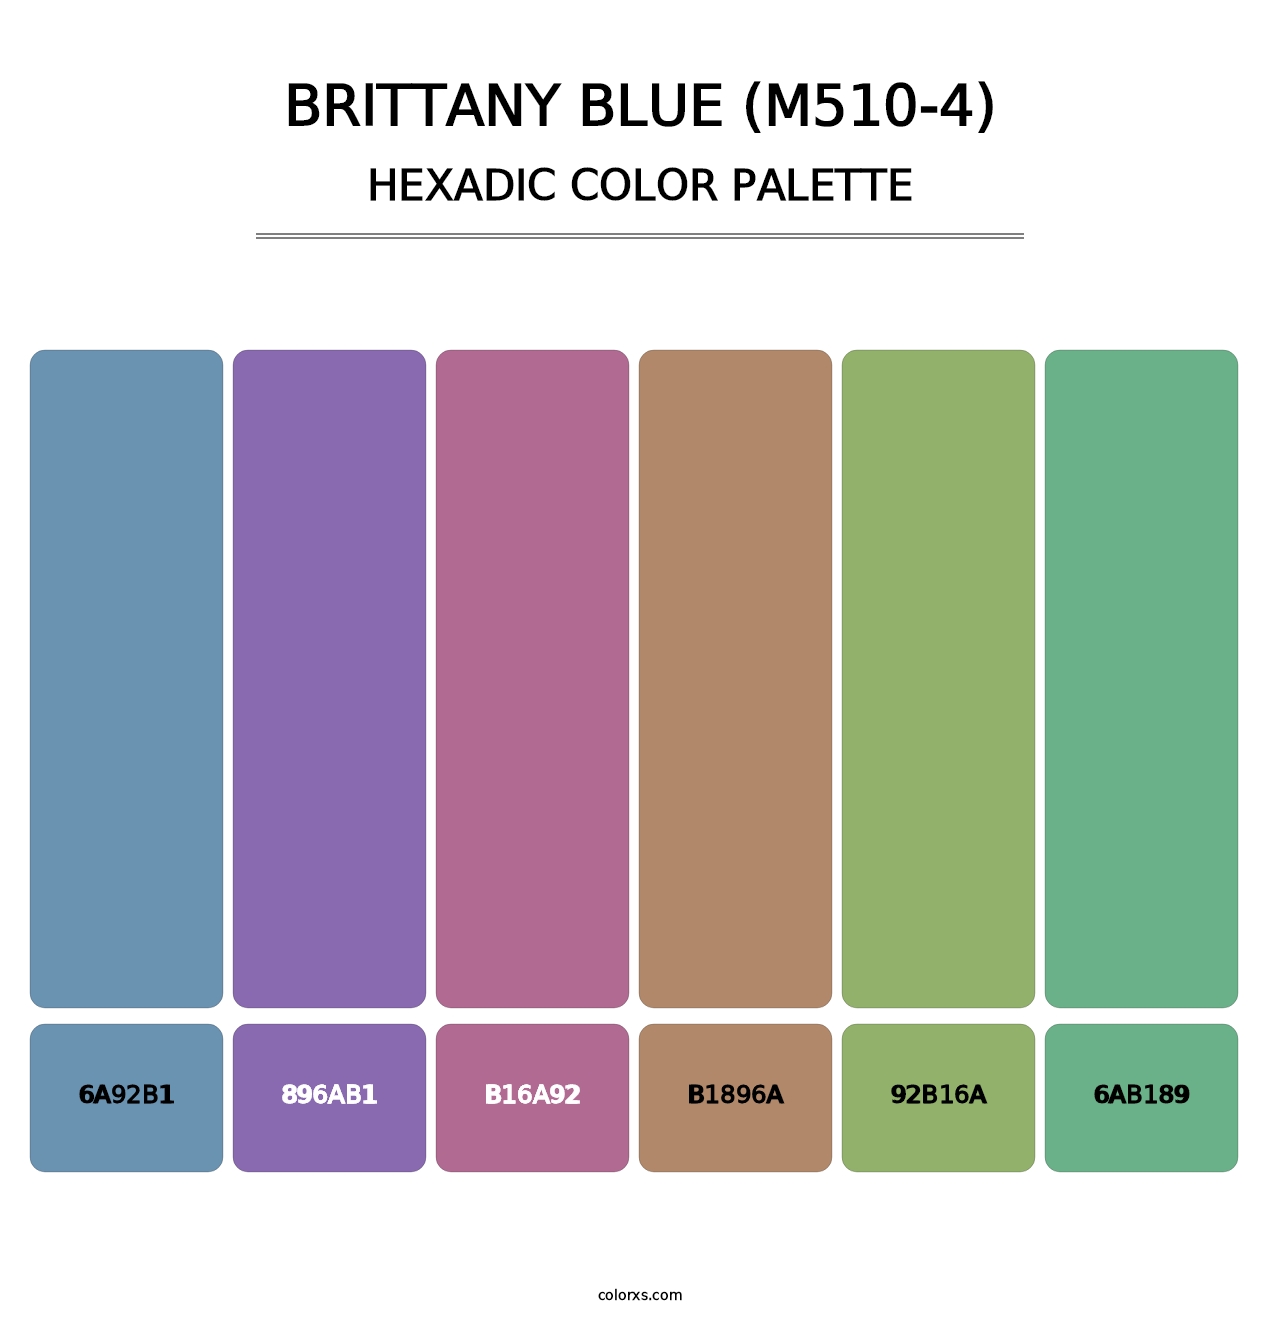 Brittany Blue (M510-4) - Hexadic Color Palette